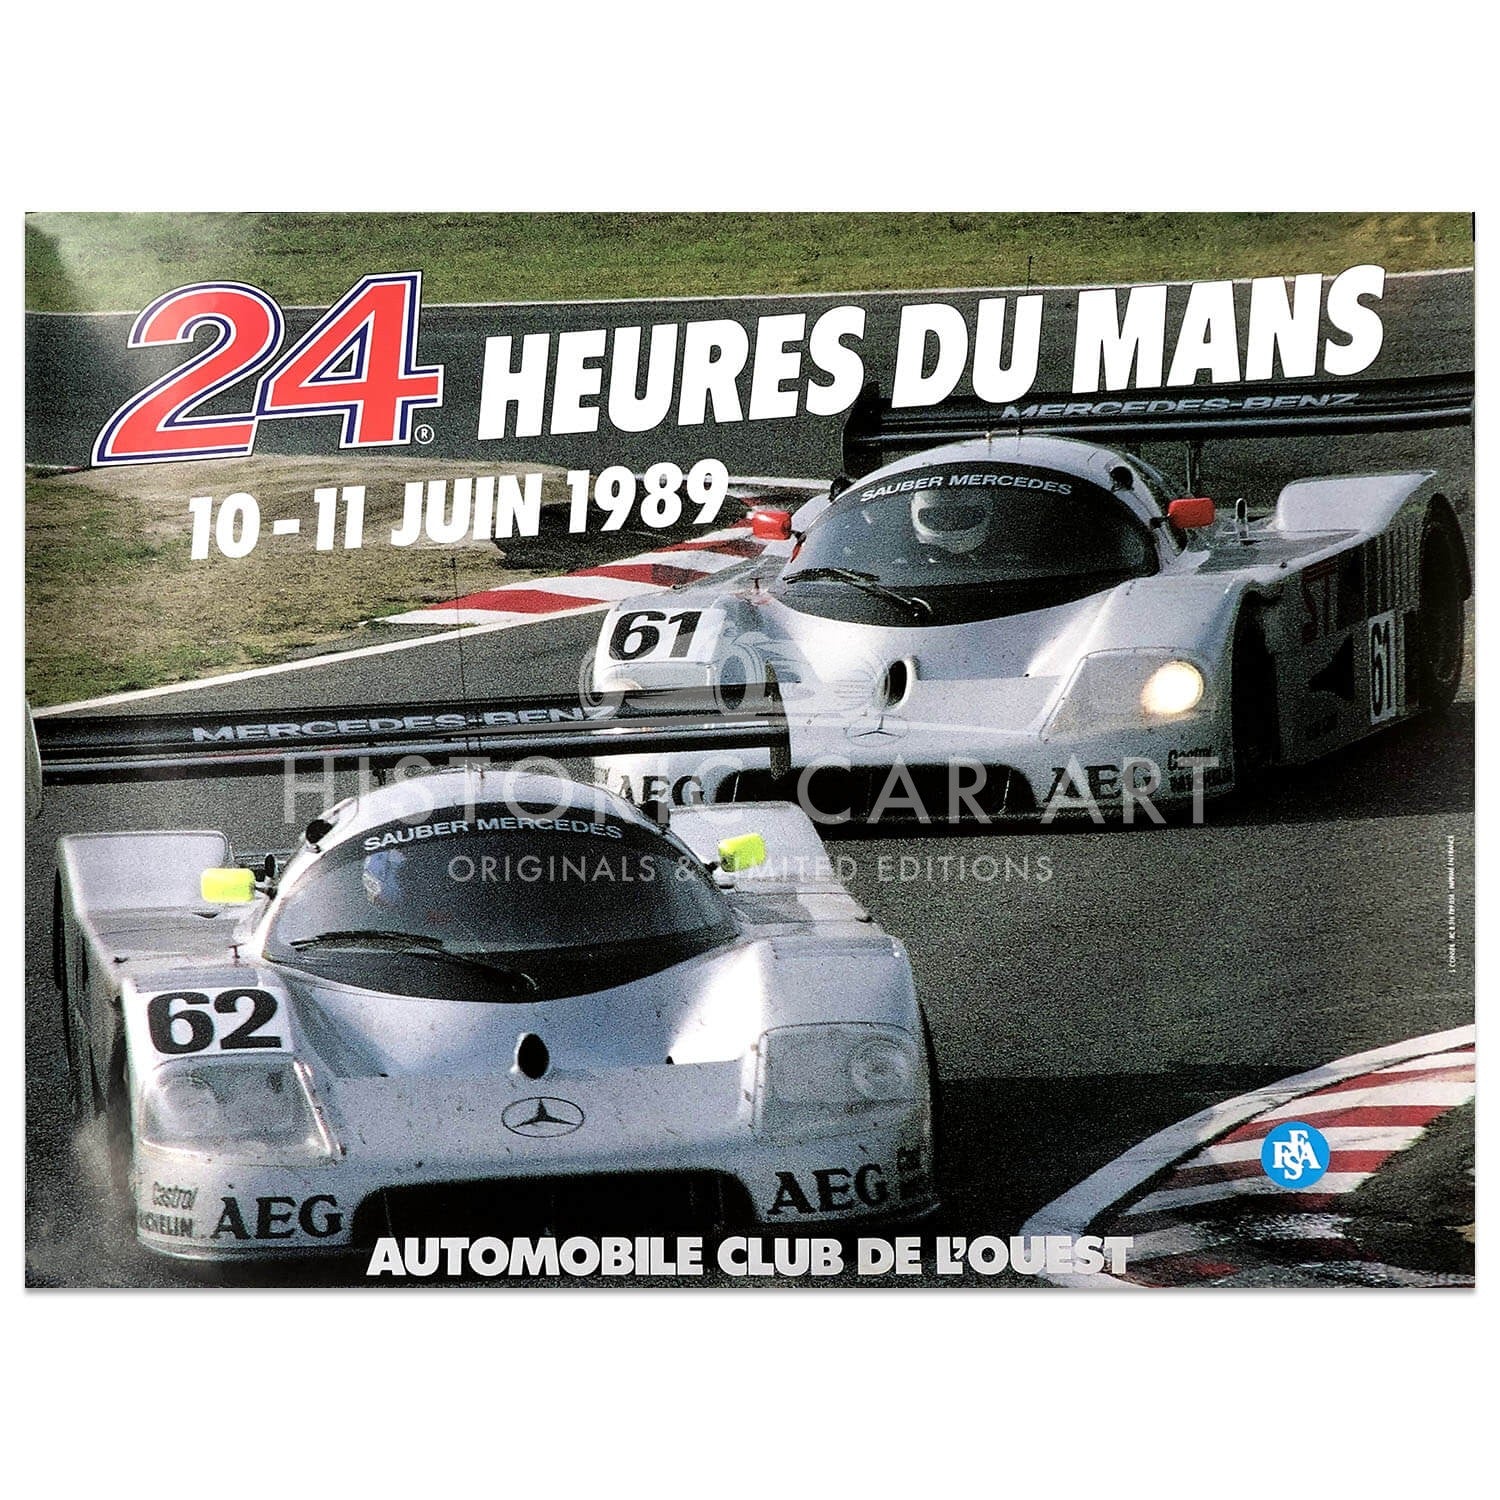 French | Le Mans 24 hours 1989 Original Poster